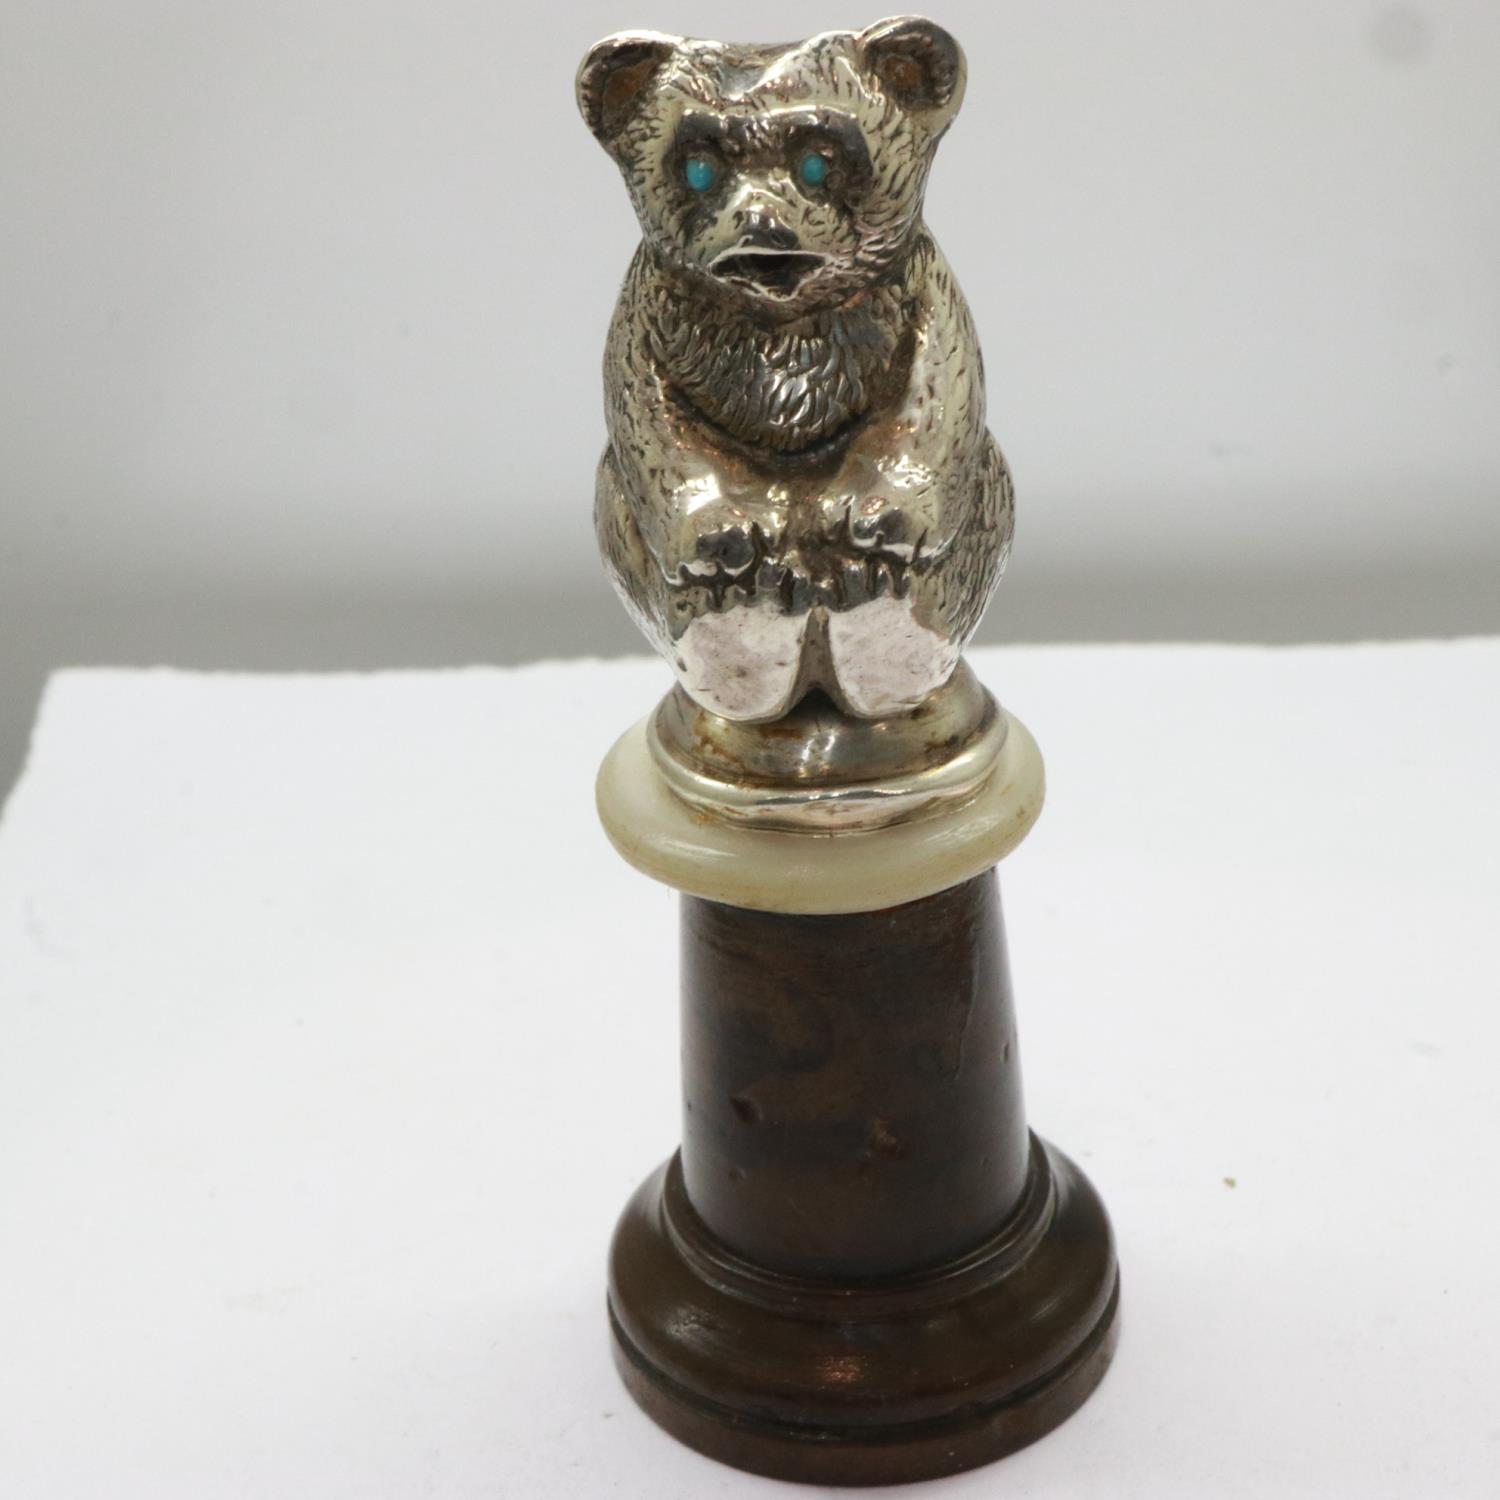 Edwardian hallmarked silver teddy bear figurine, set with turquoise eyes and mounted on a turned